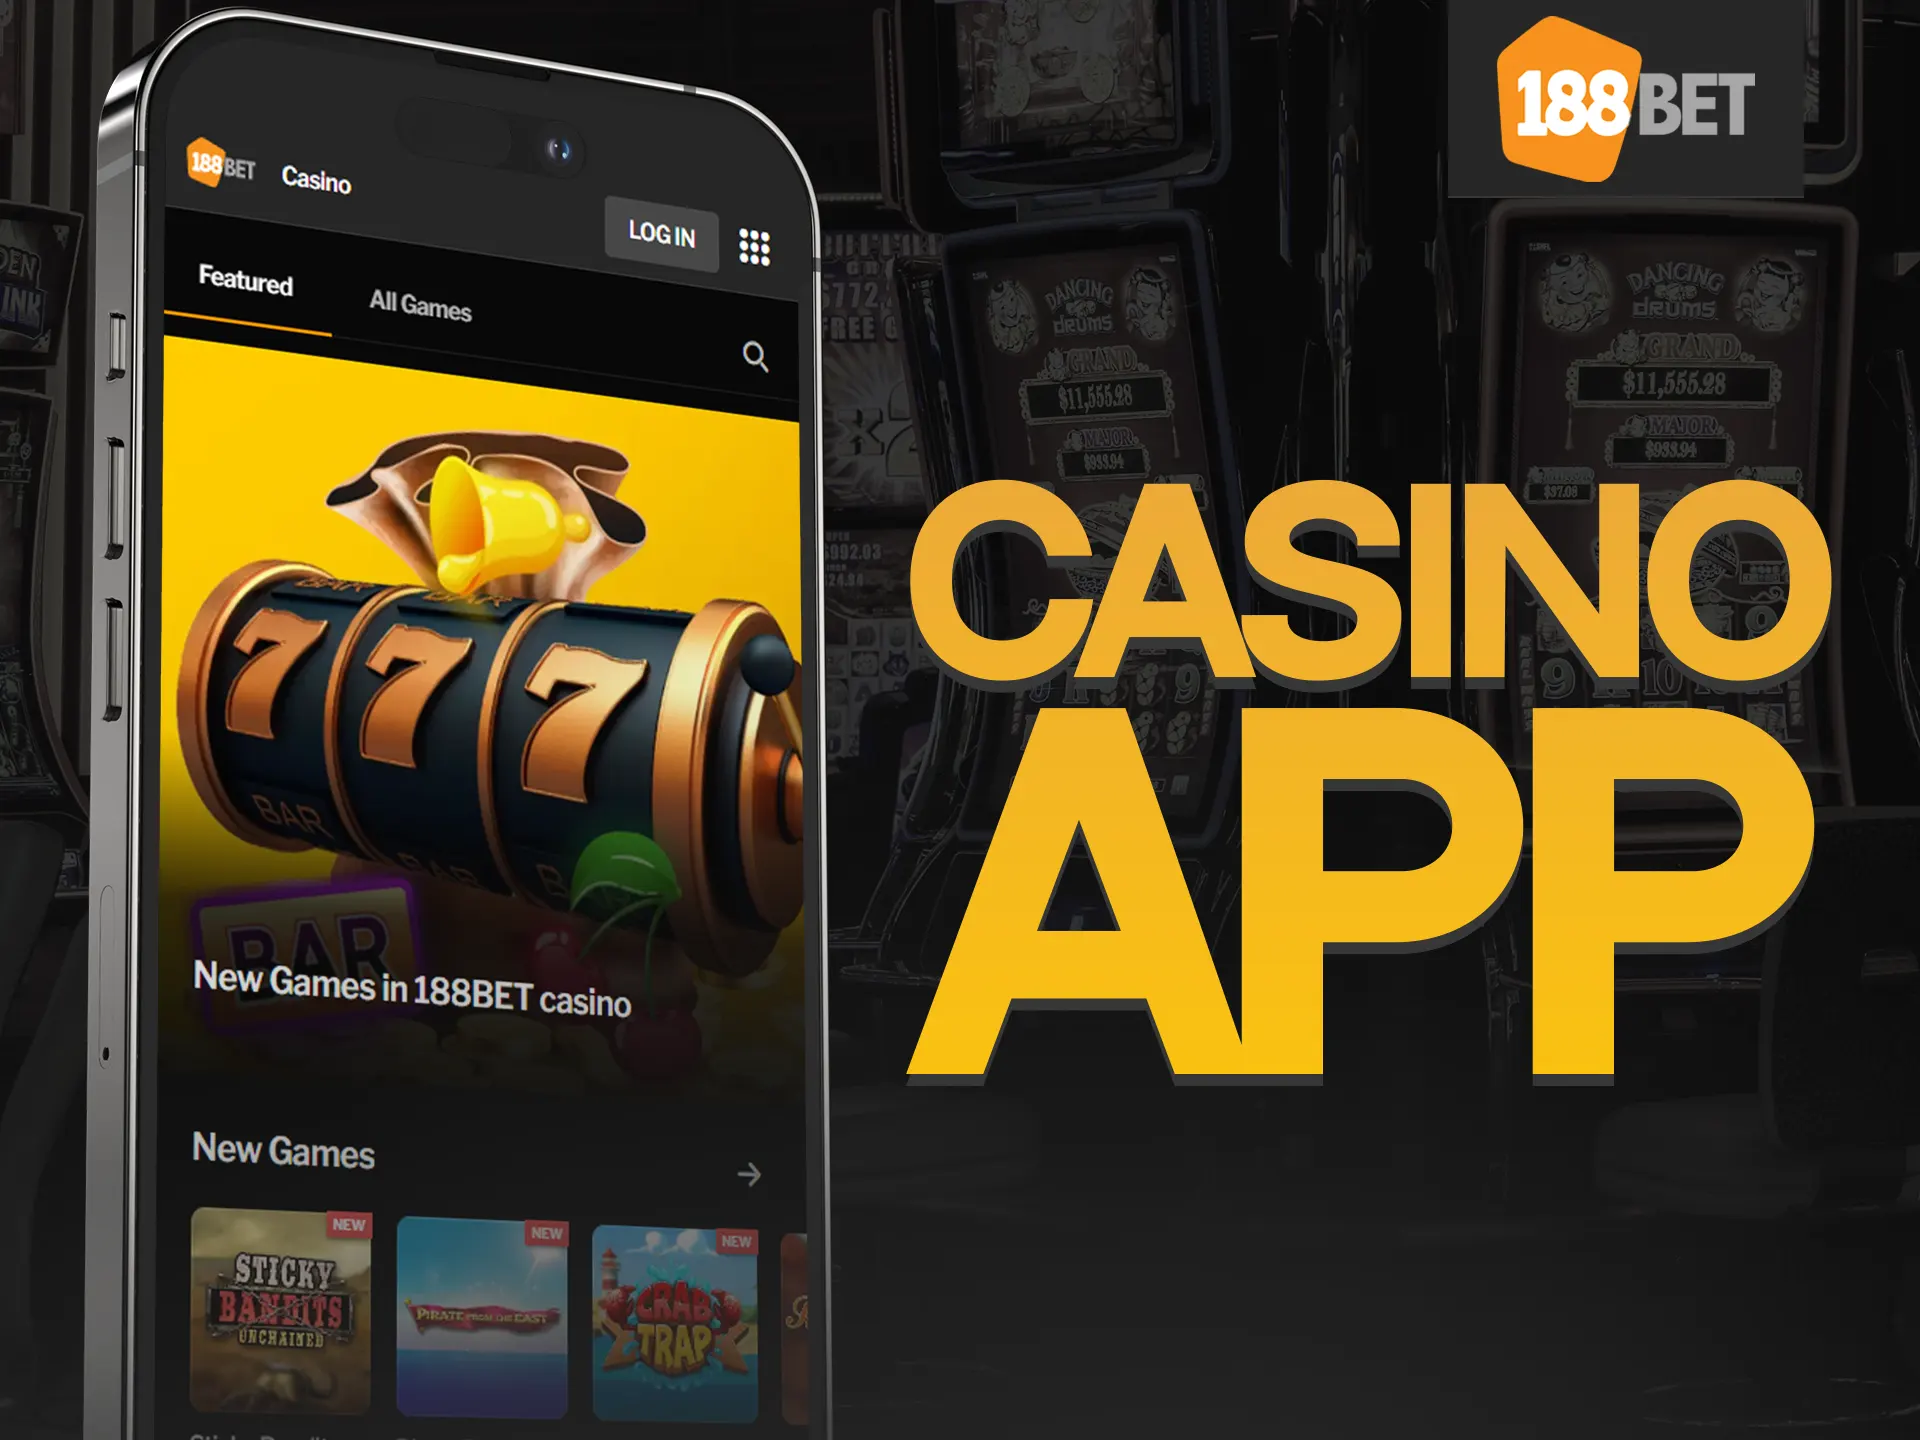 188bet app provides a wide range of casino games.